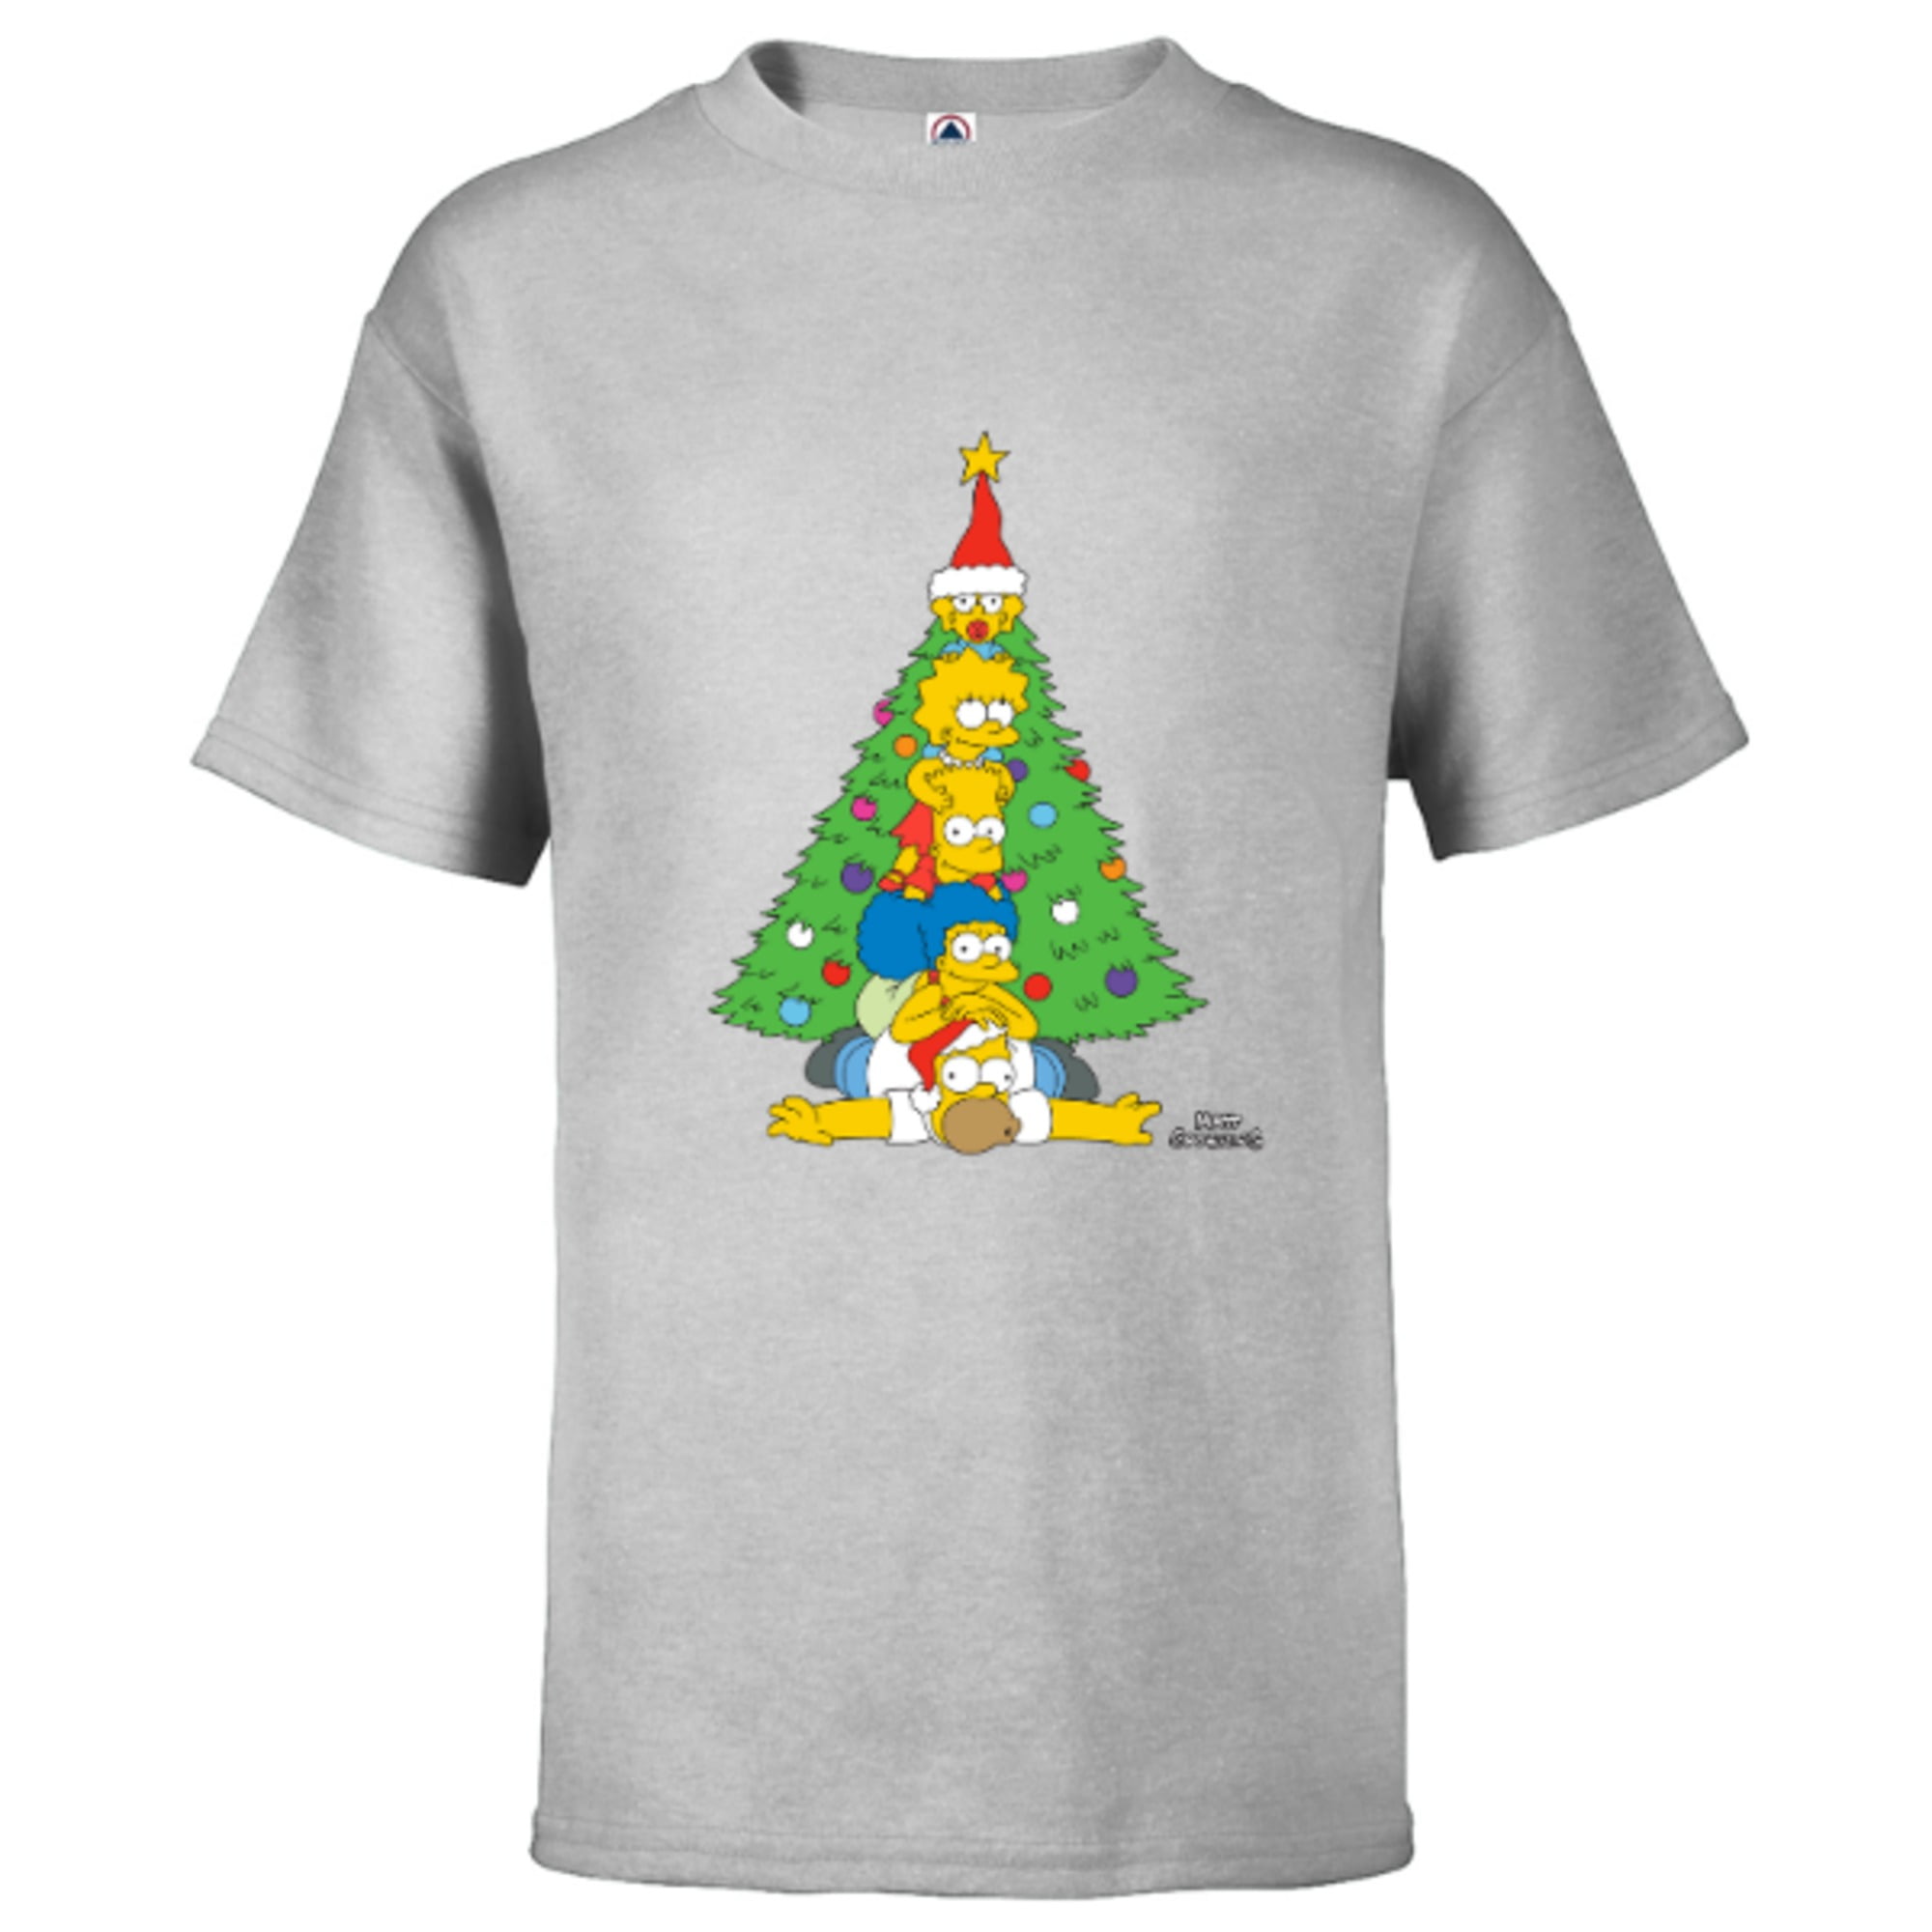 The Simpsons Family Kids Christmas for T-Shirt Short – Sleeve - Customized-Red Holiday Tree